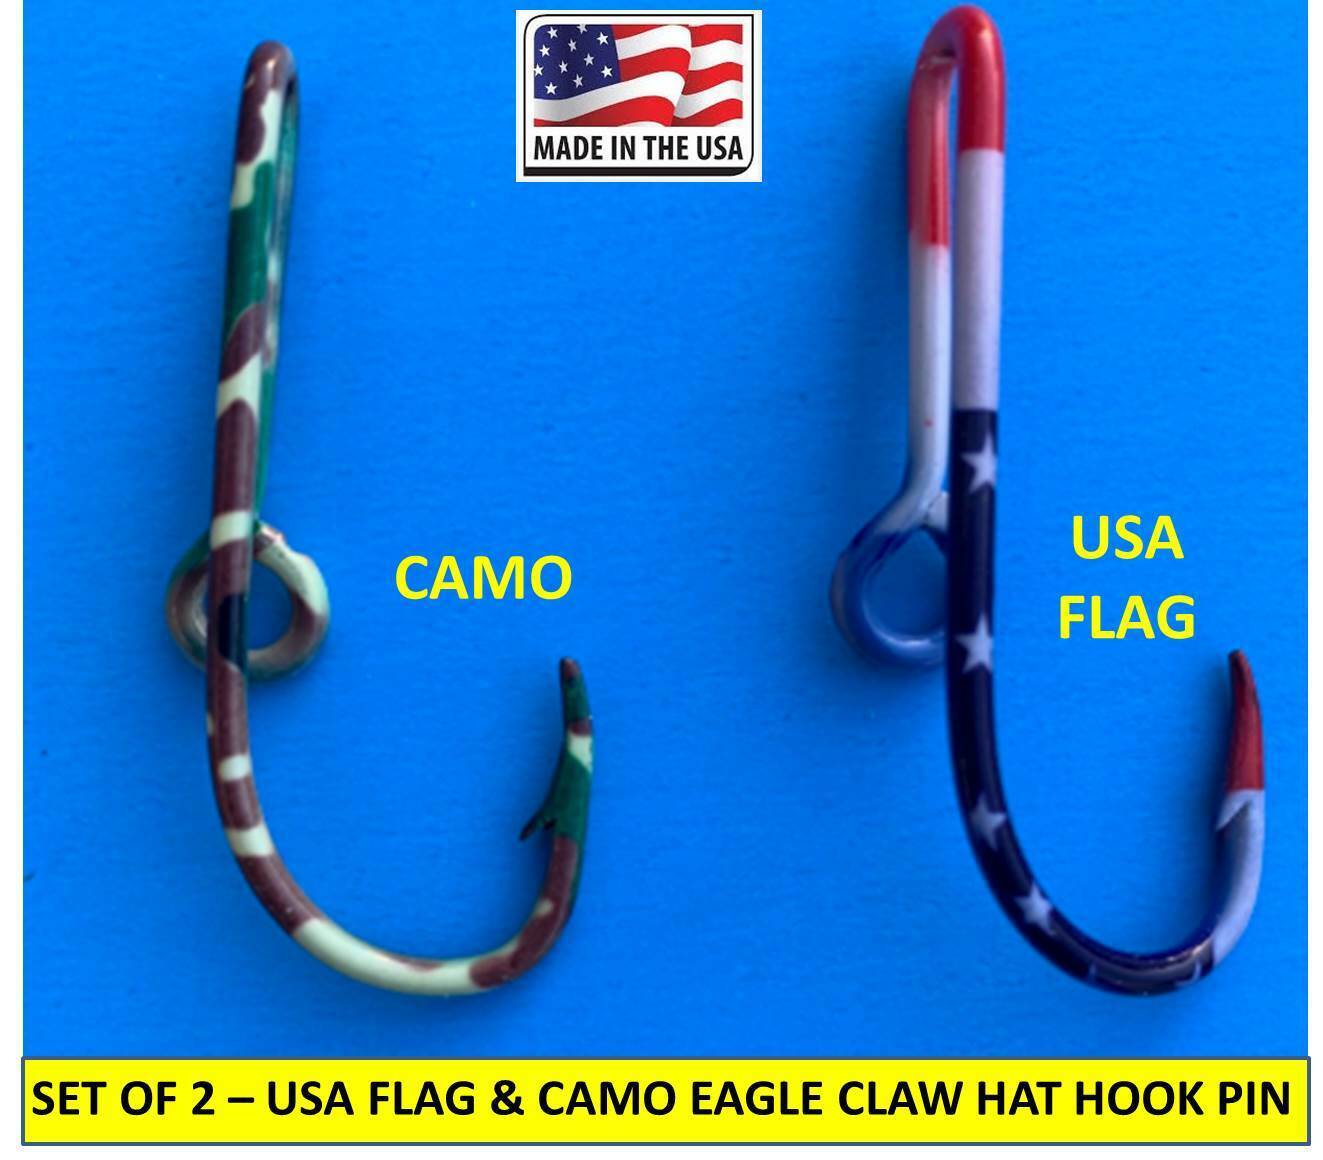 USA FLAG + CAMO HOOKS - EAGLE CLAW FISH HOOK HAT PIN MONEY CLIPS - Set of TWO(2) Eagle Claw